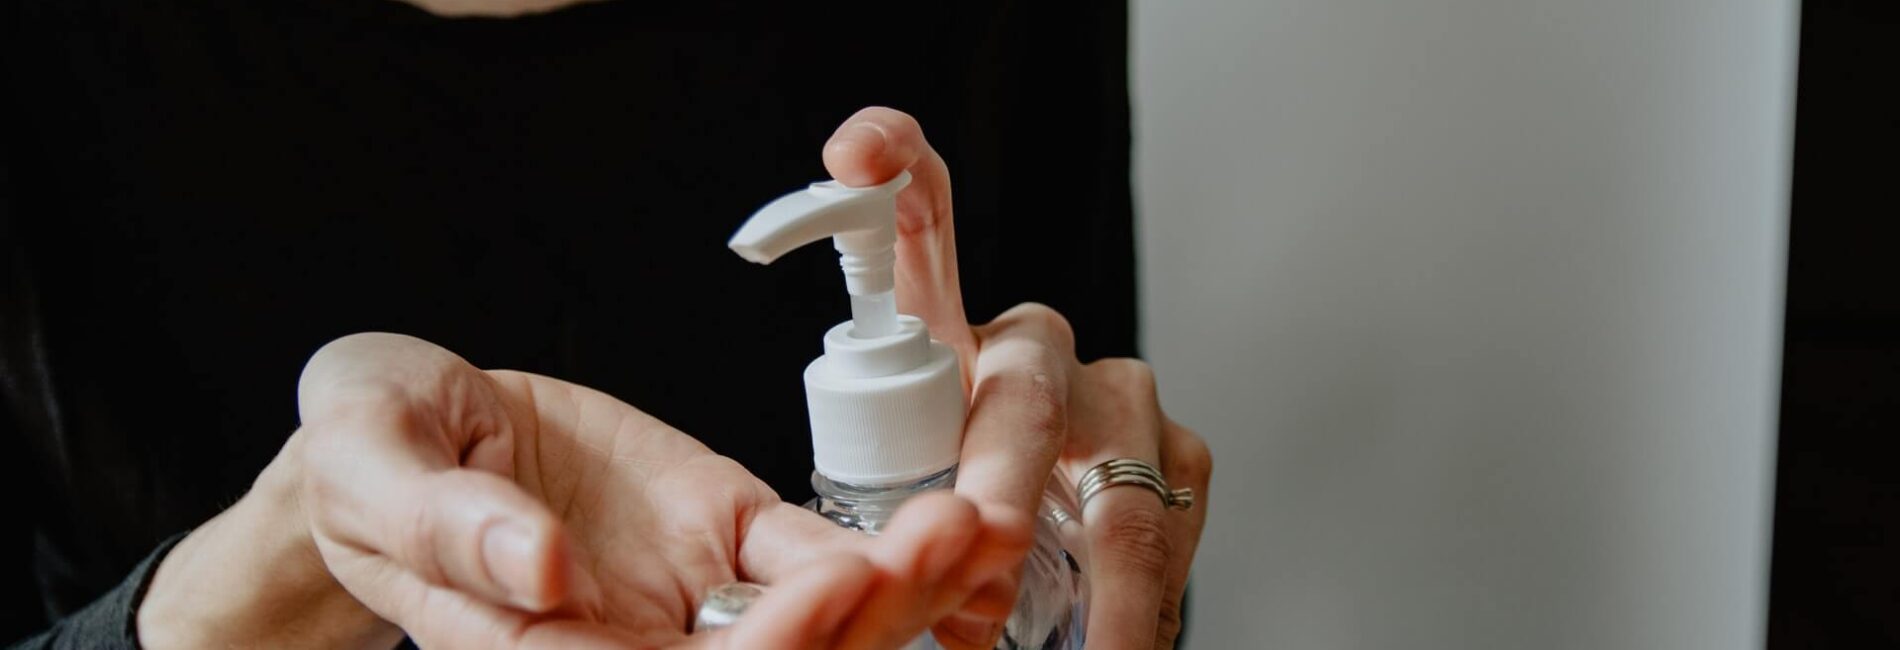 Homemade Hand Sanitizer (Purell) to Fight the Flu